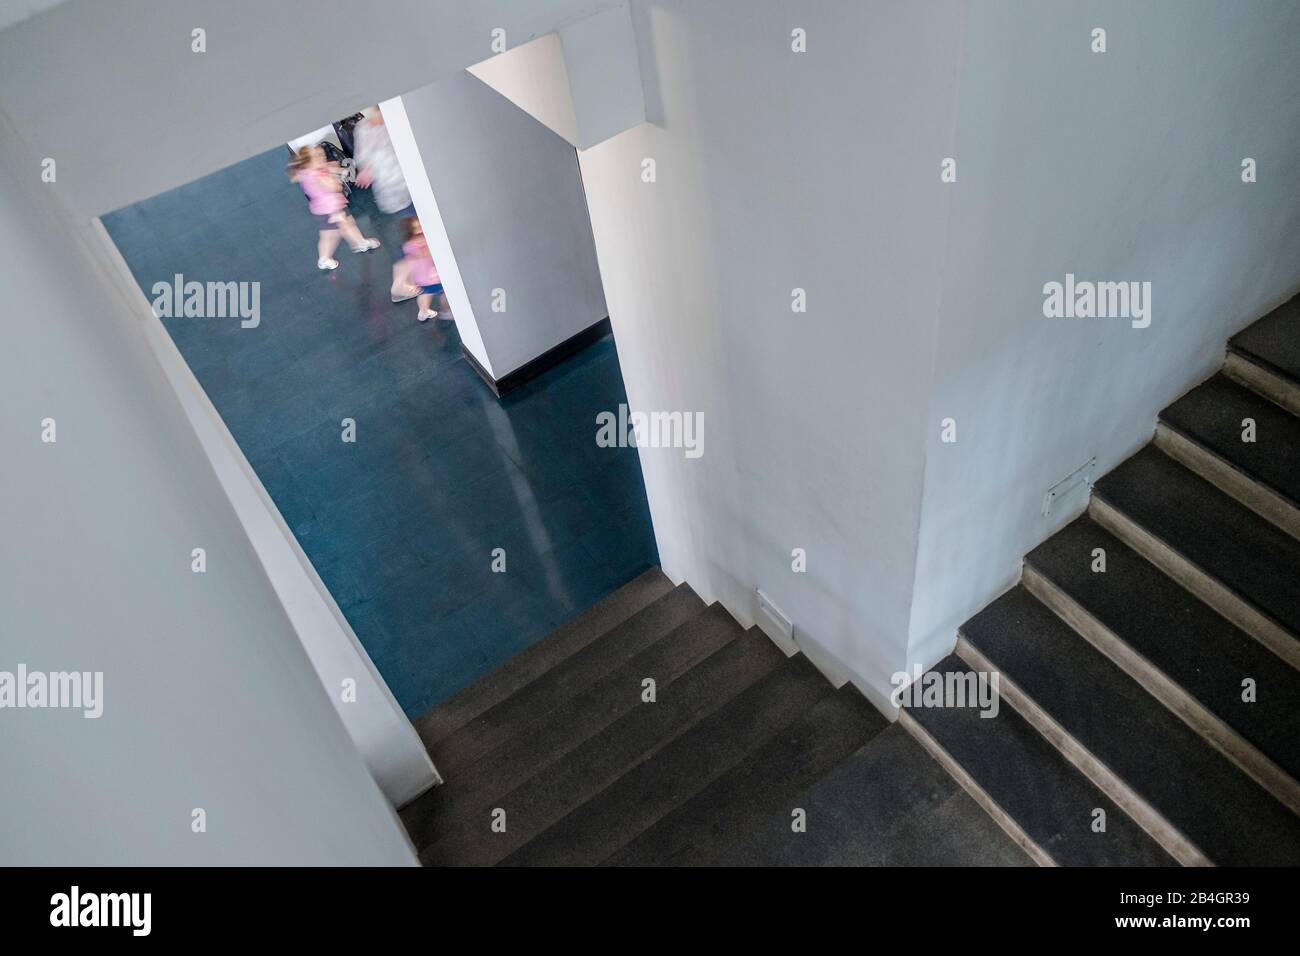 Architecture, down a staircase into a hallway, blurred people passing by Stock Photo